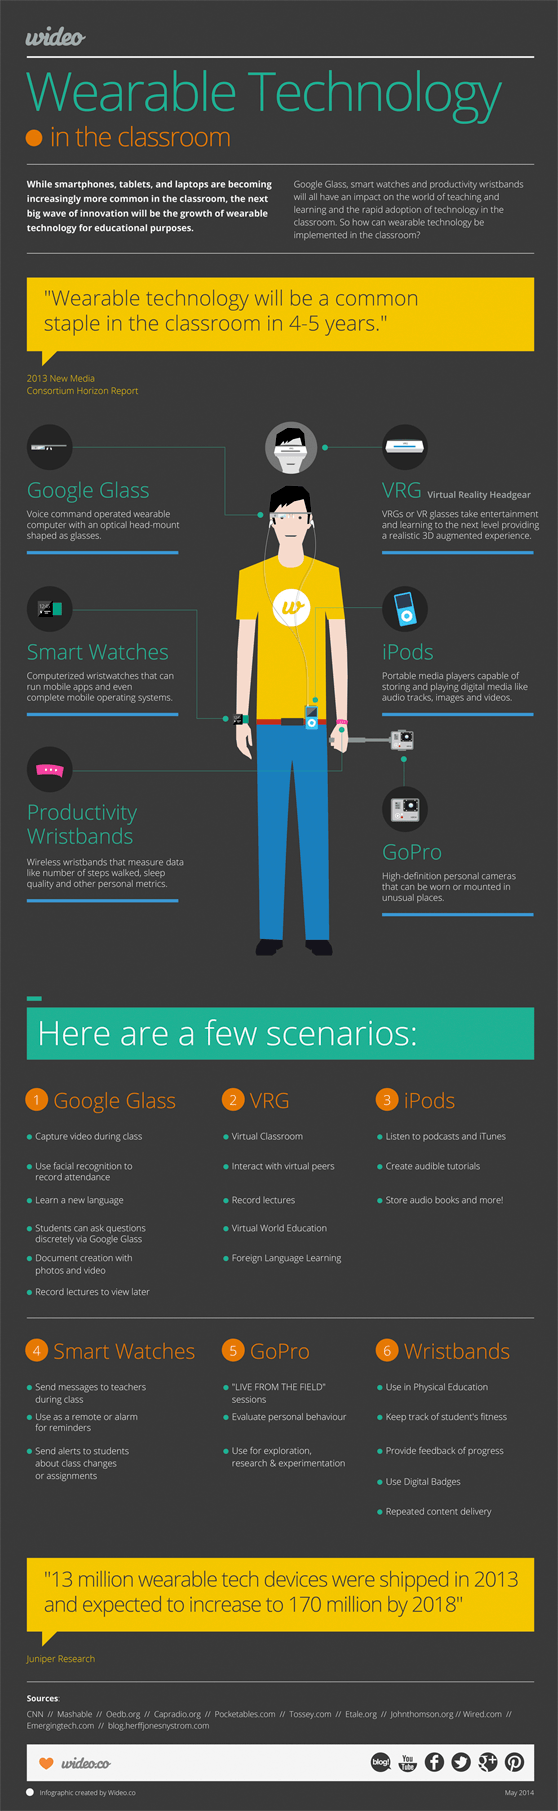 Wearable Technology in the Classroom Infographic